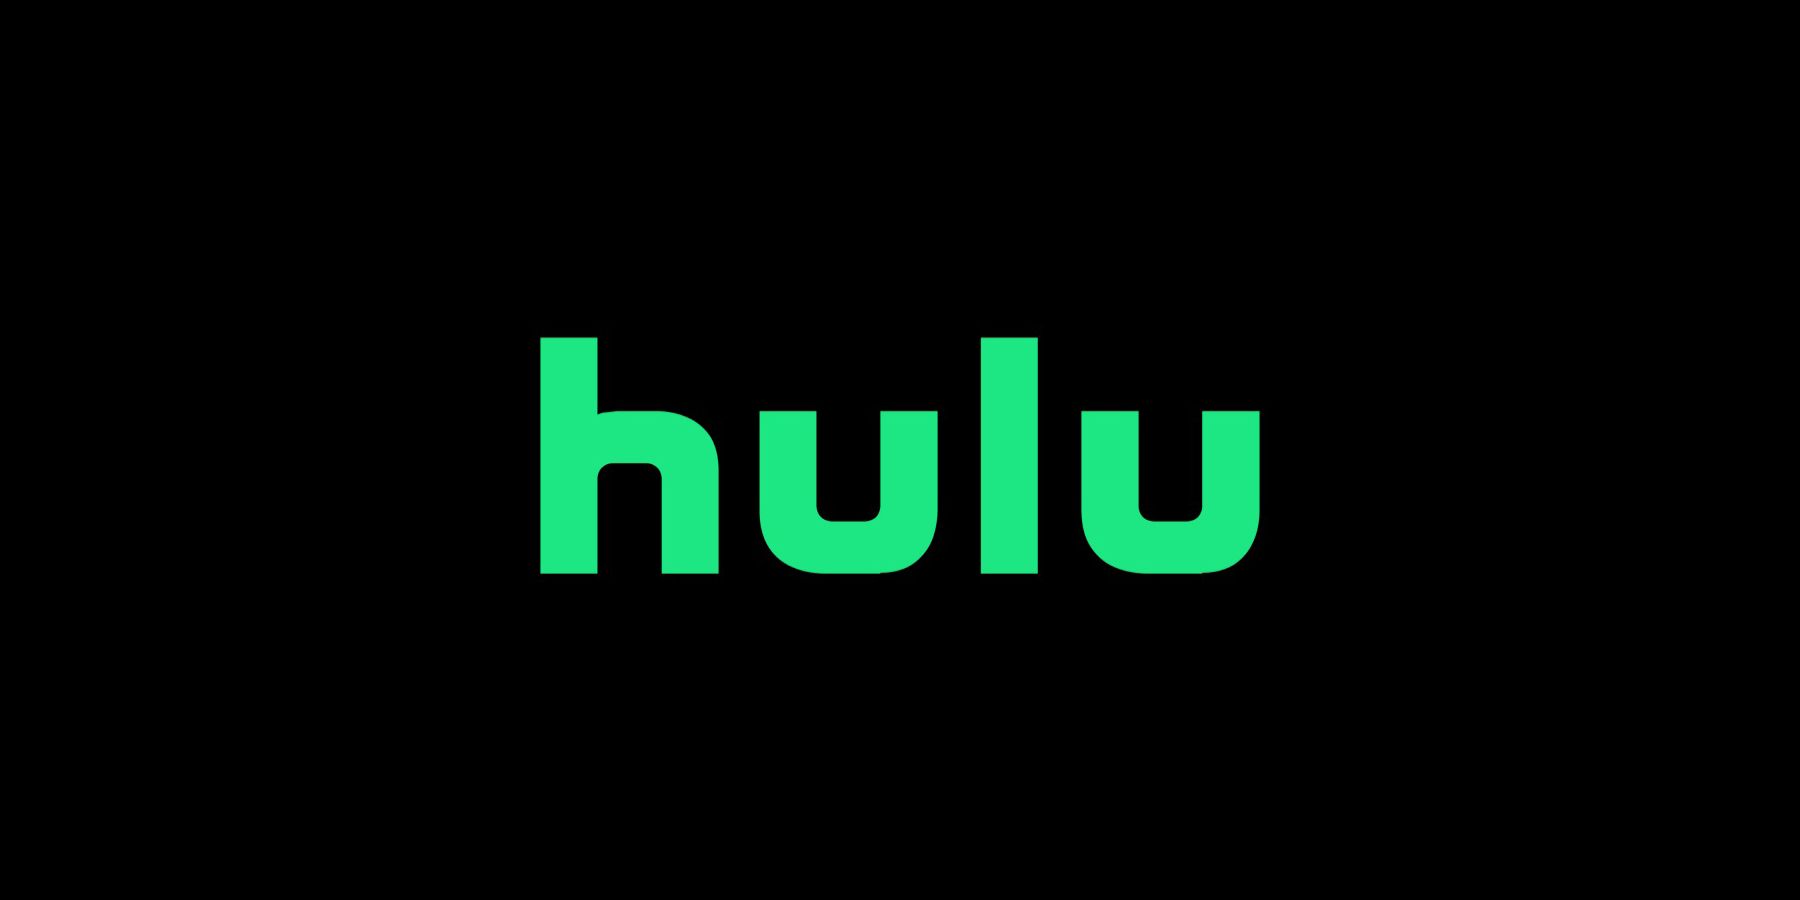 Does the free hulu that comes with spotify have ads without